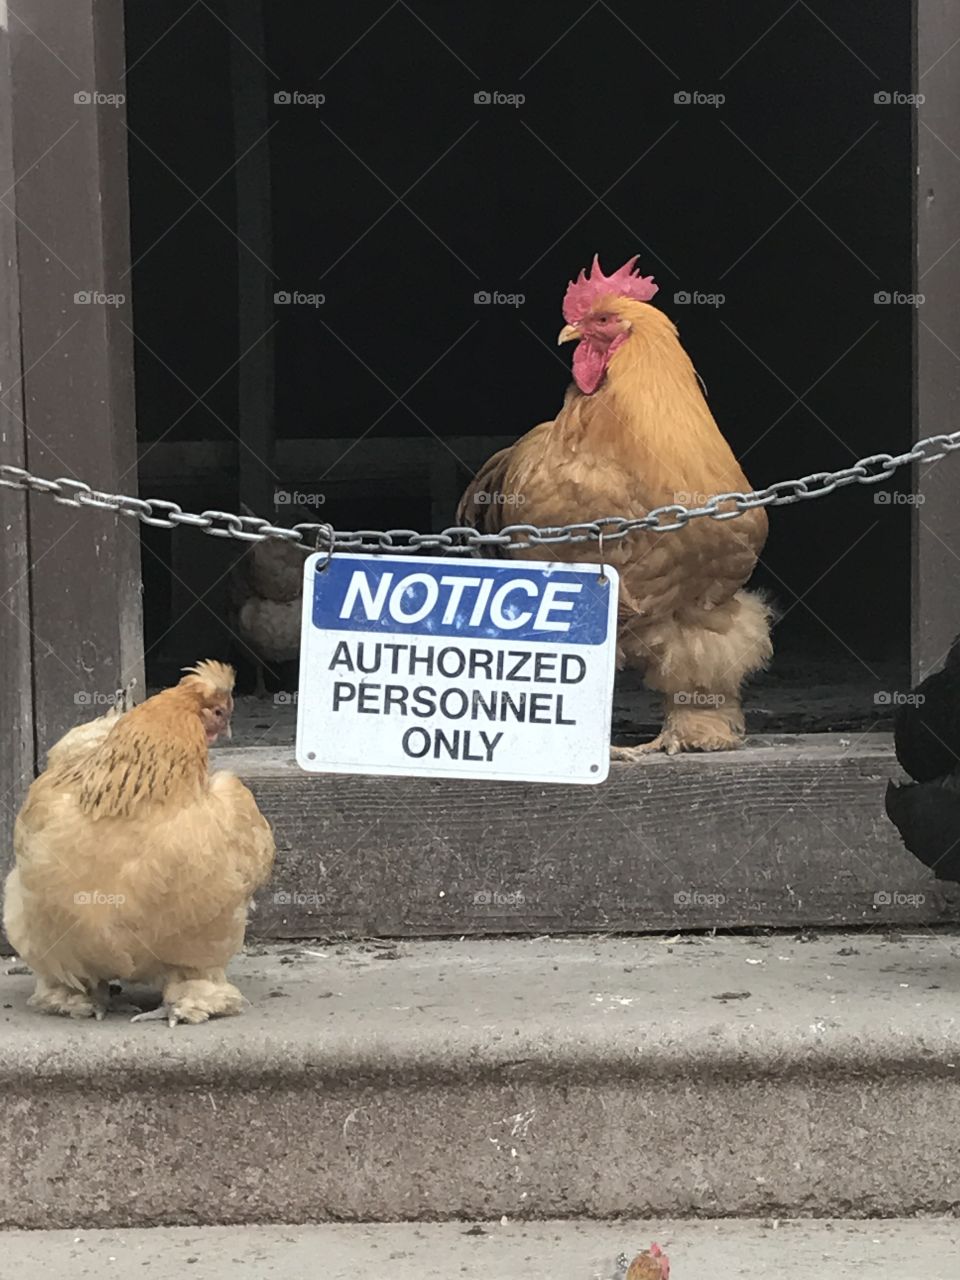 Pretty sure that Chicken is NOT authorized personnel...